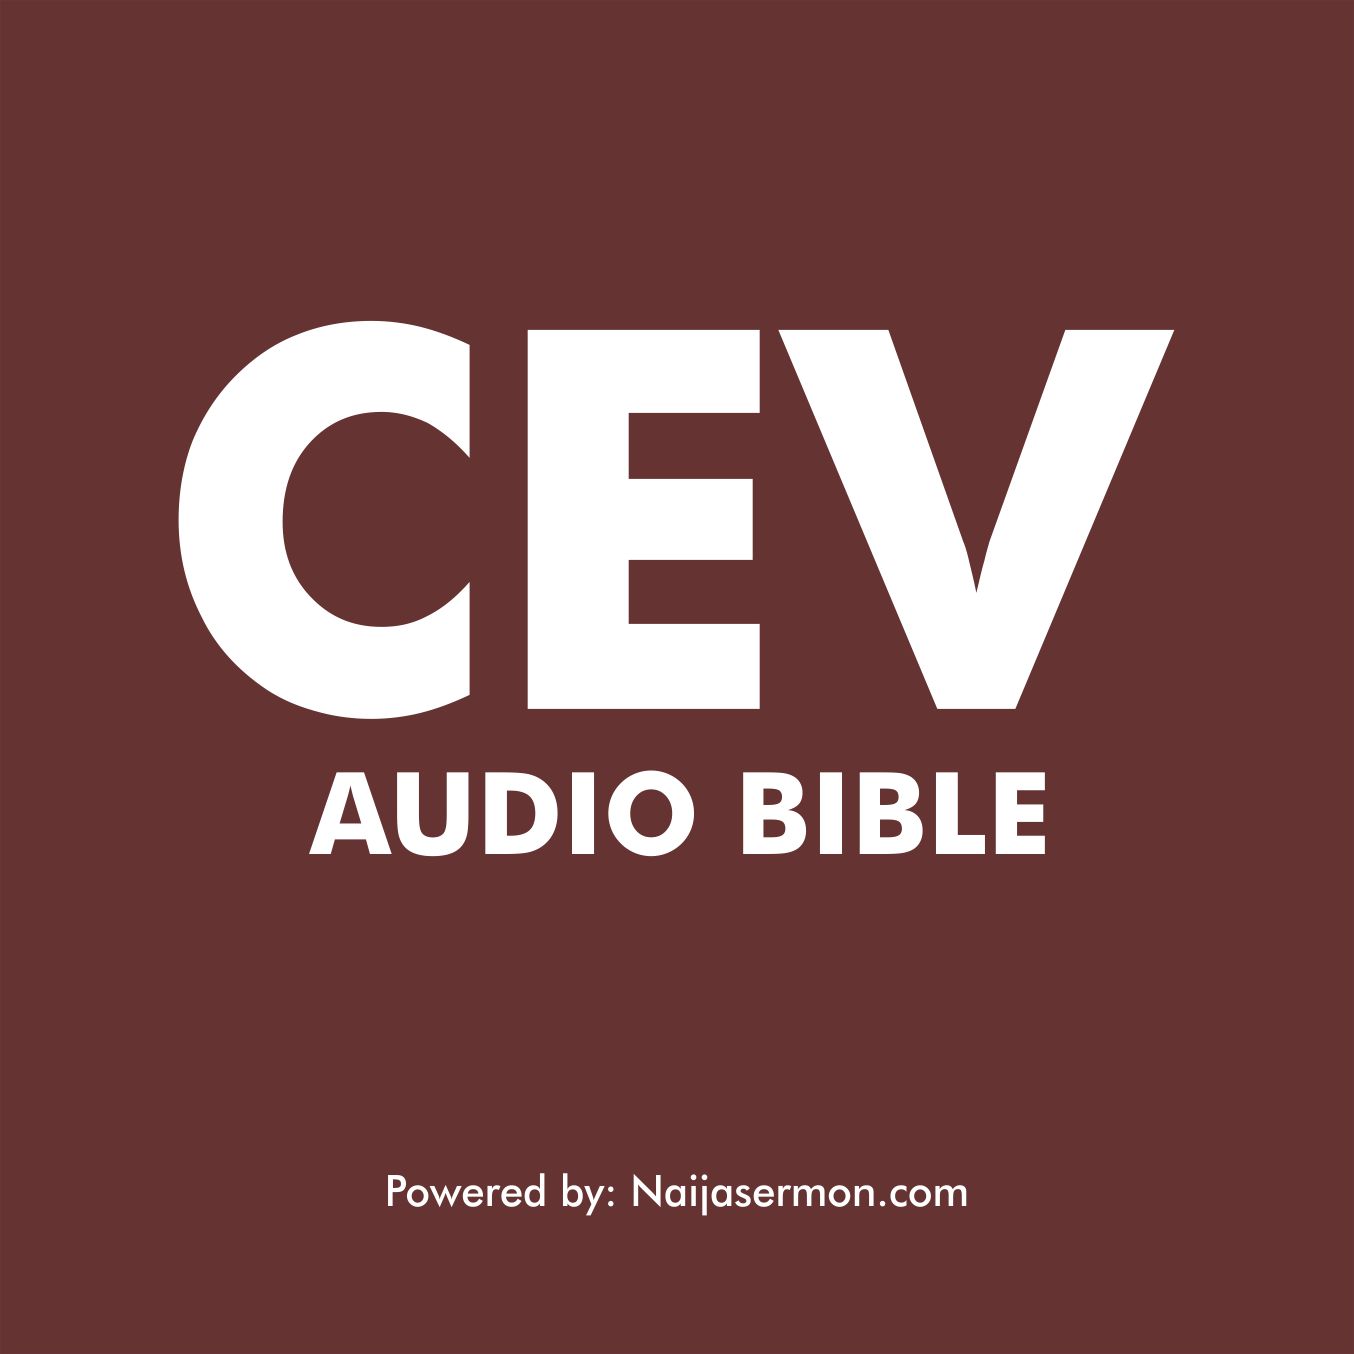 [Free] Download Contemporary English Version (CEV) Audio Bible MP3 - Dramatized 19